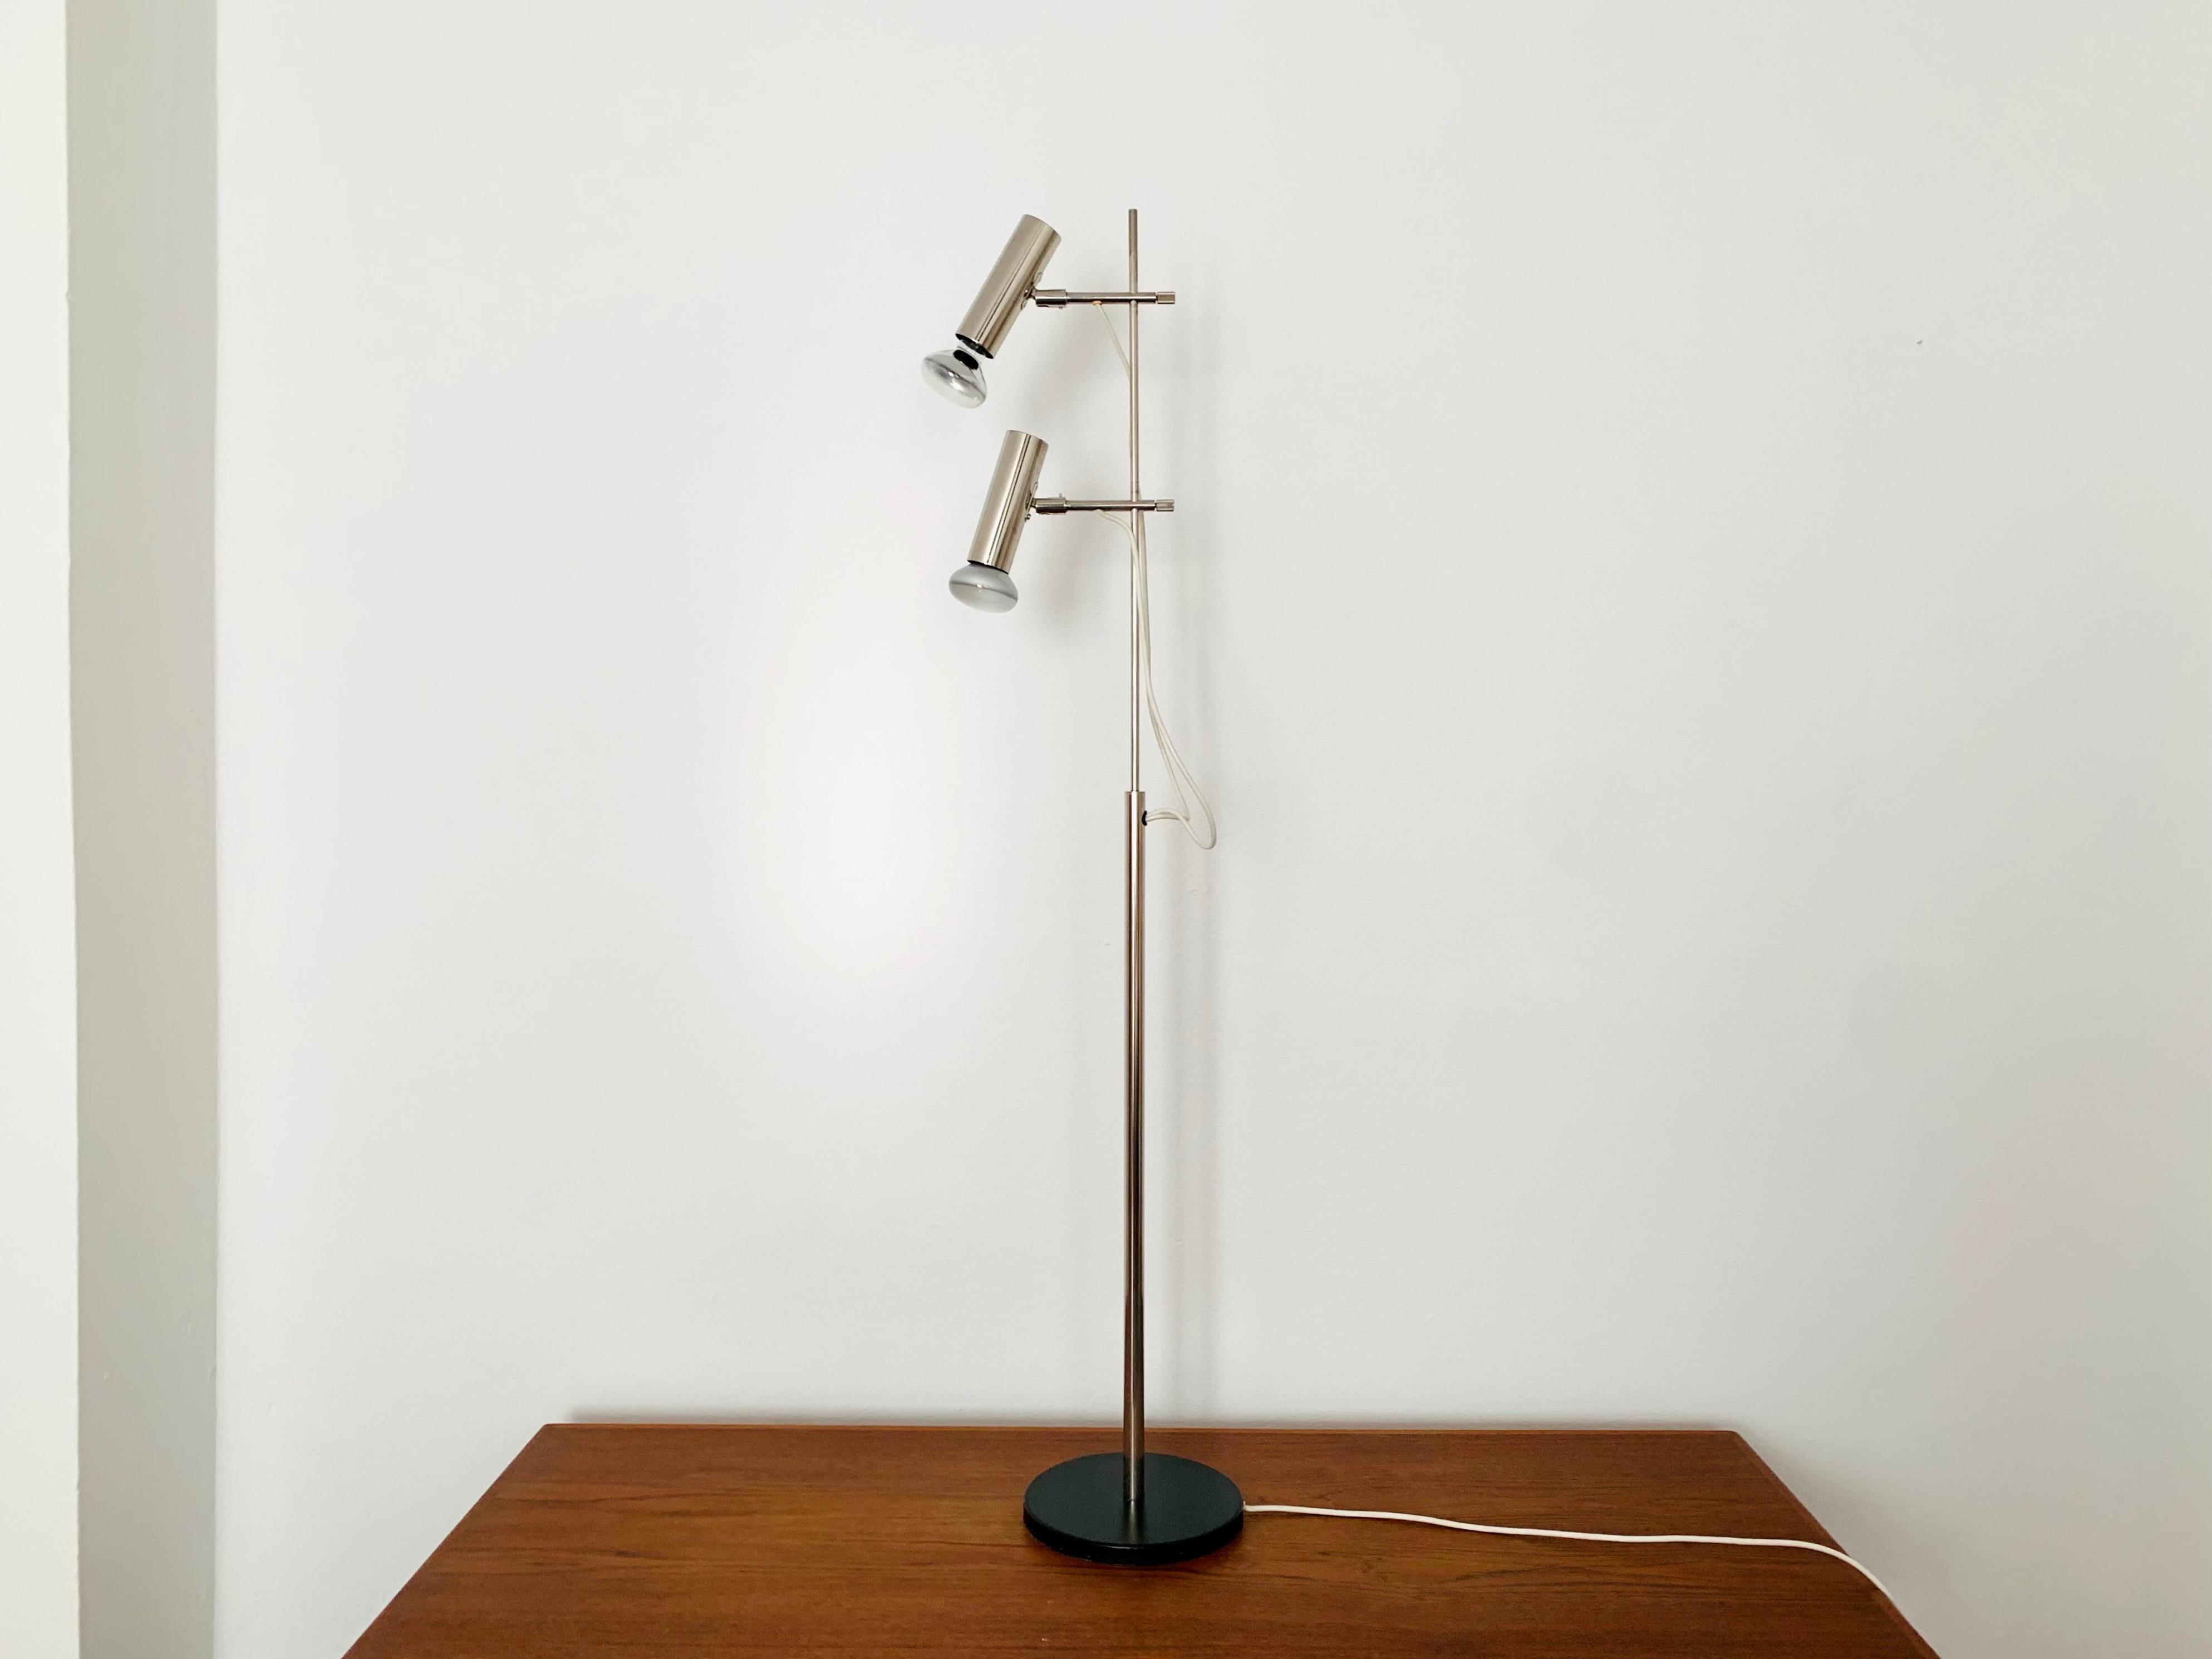 Stunning floor lamp from the 1960s.
Very unusual design and very high quality workmanship.
Individually adjustable spots.
An absolute highlight for every home.

Design: Gino Sarfatti (attributed)
Manufacturer: Arteluce